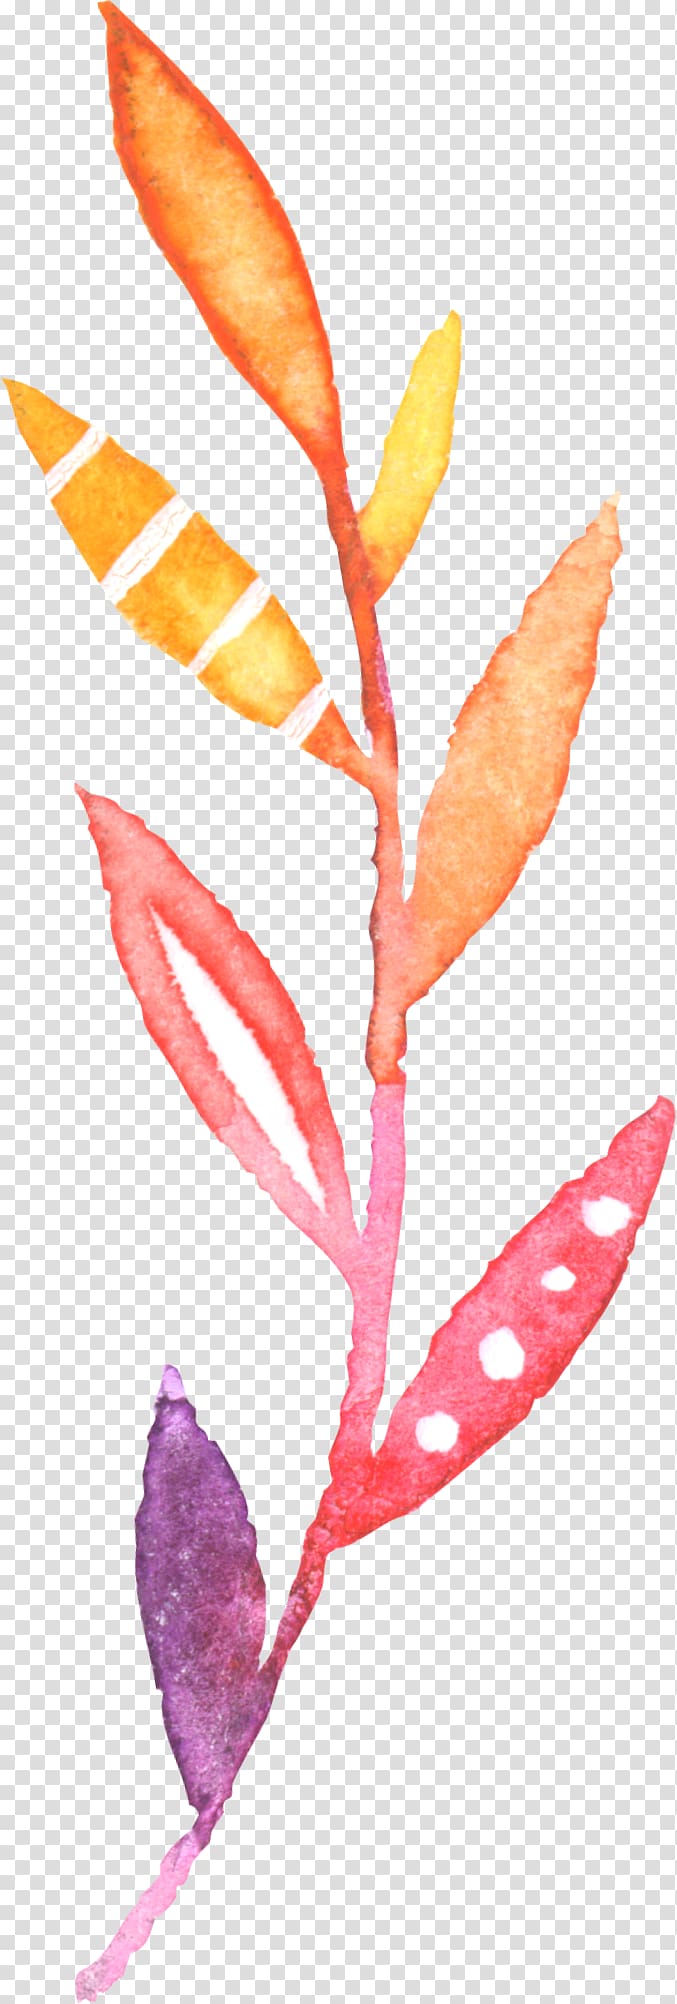 Watercolor: Flowers Watercolor painting, Hand-painted watercolor plant transparent background PNG clipart